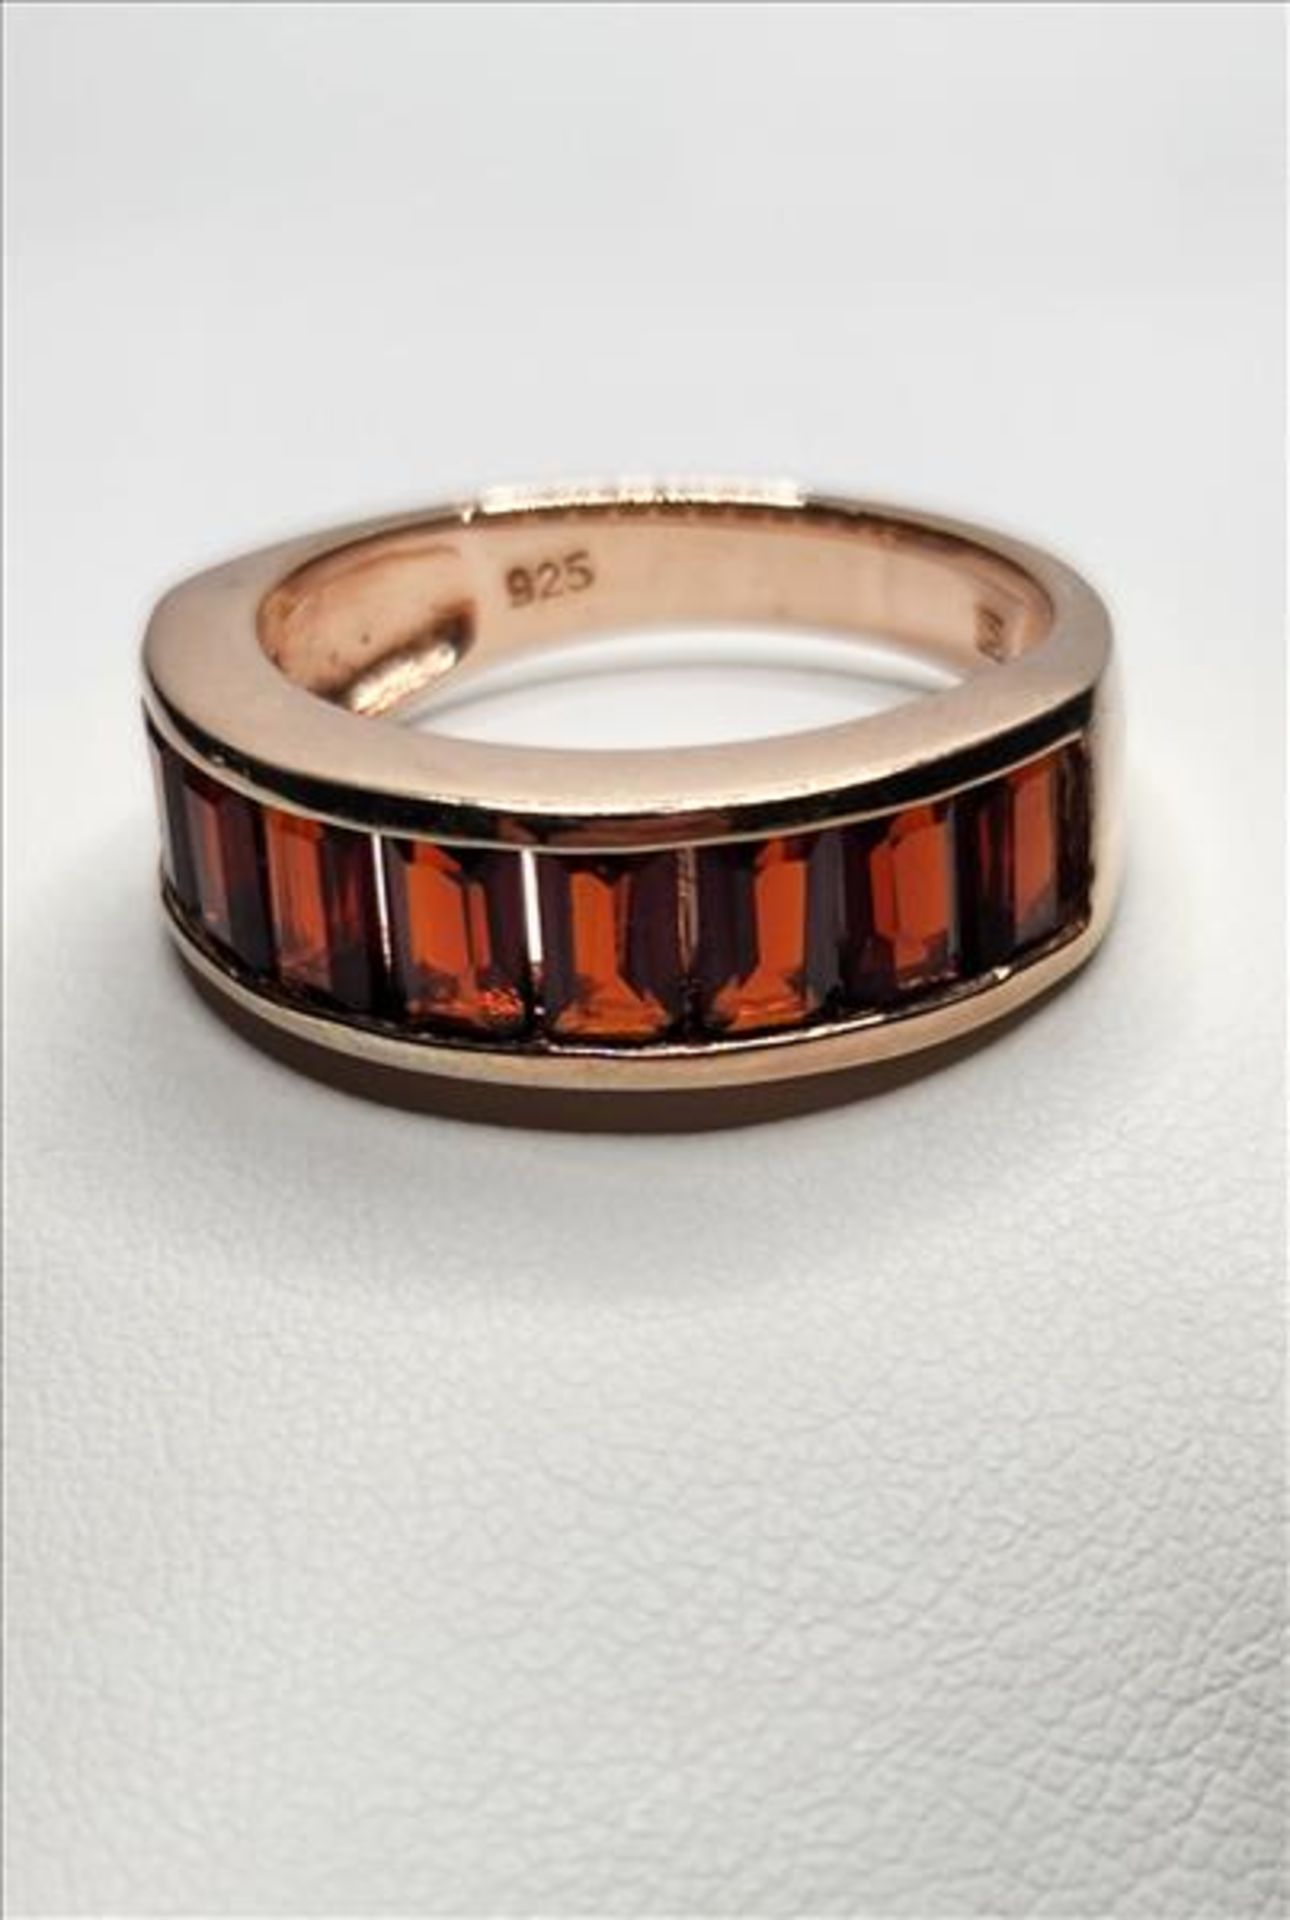 channel set amber stones sterling silver ring - Image 6 of 6